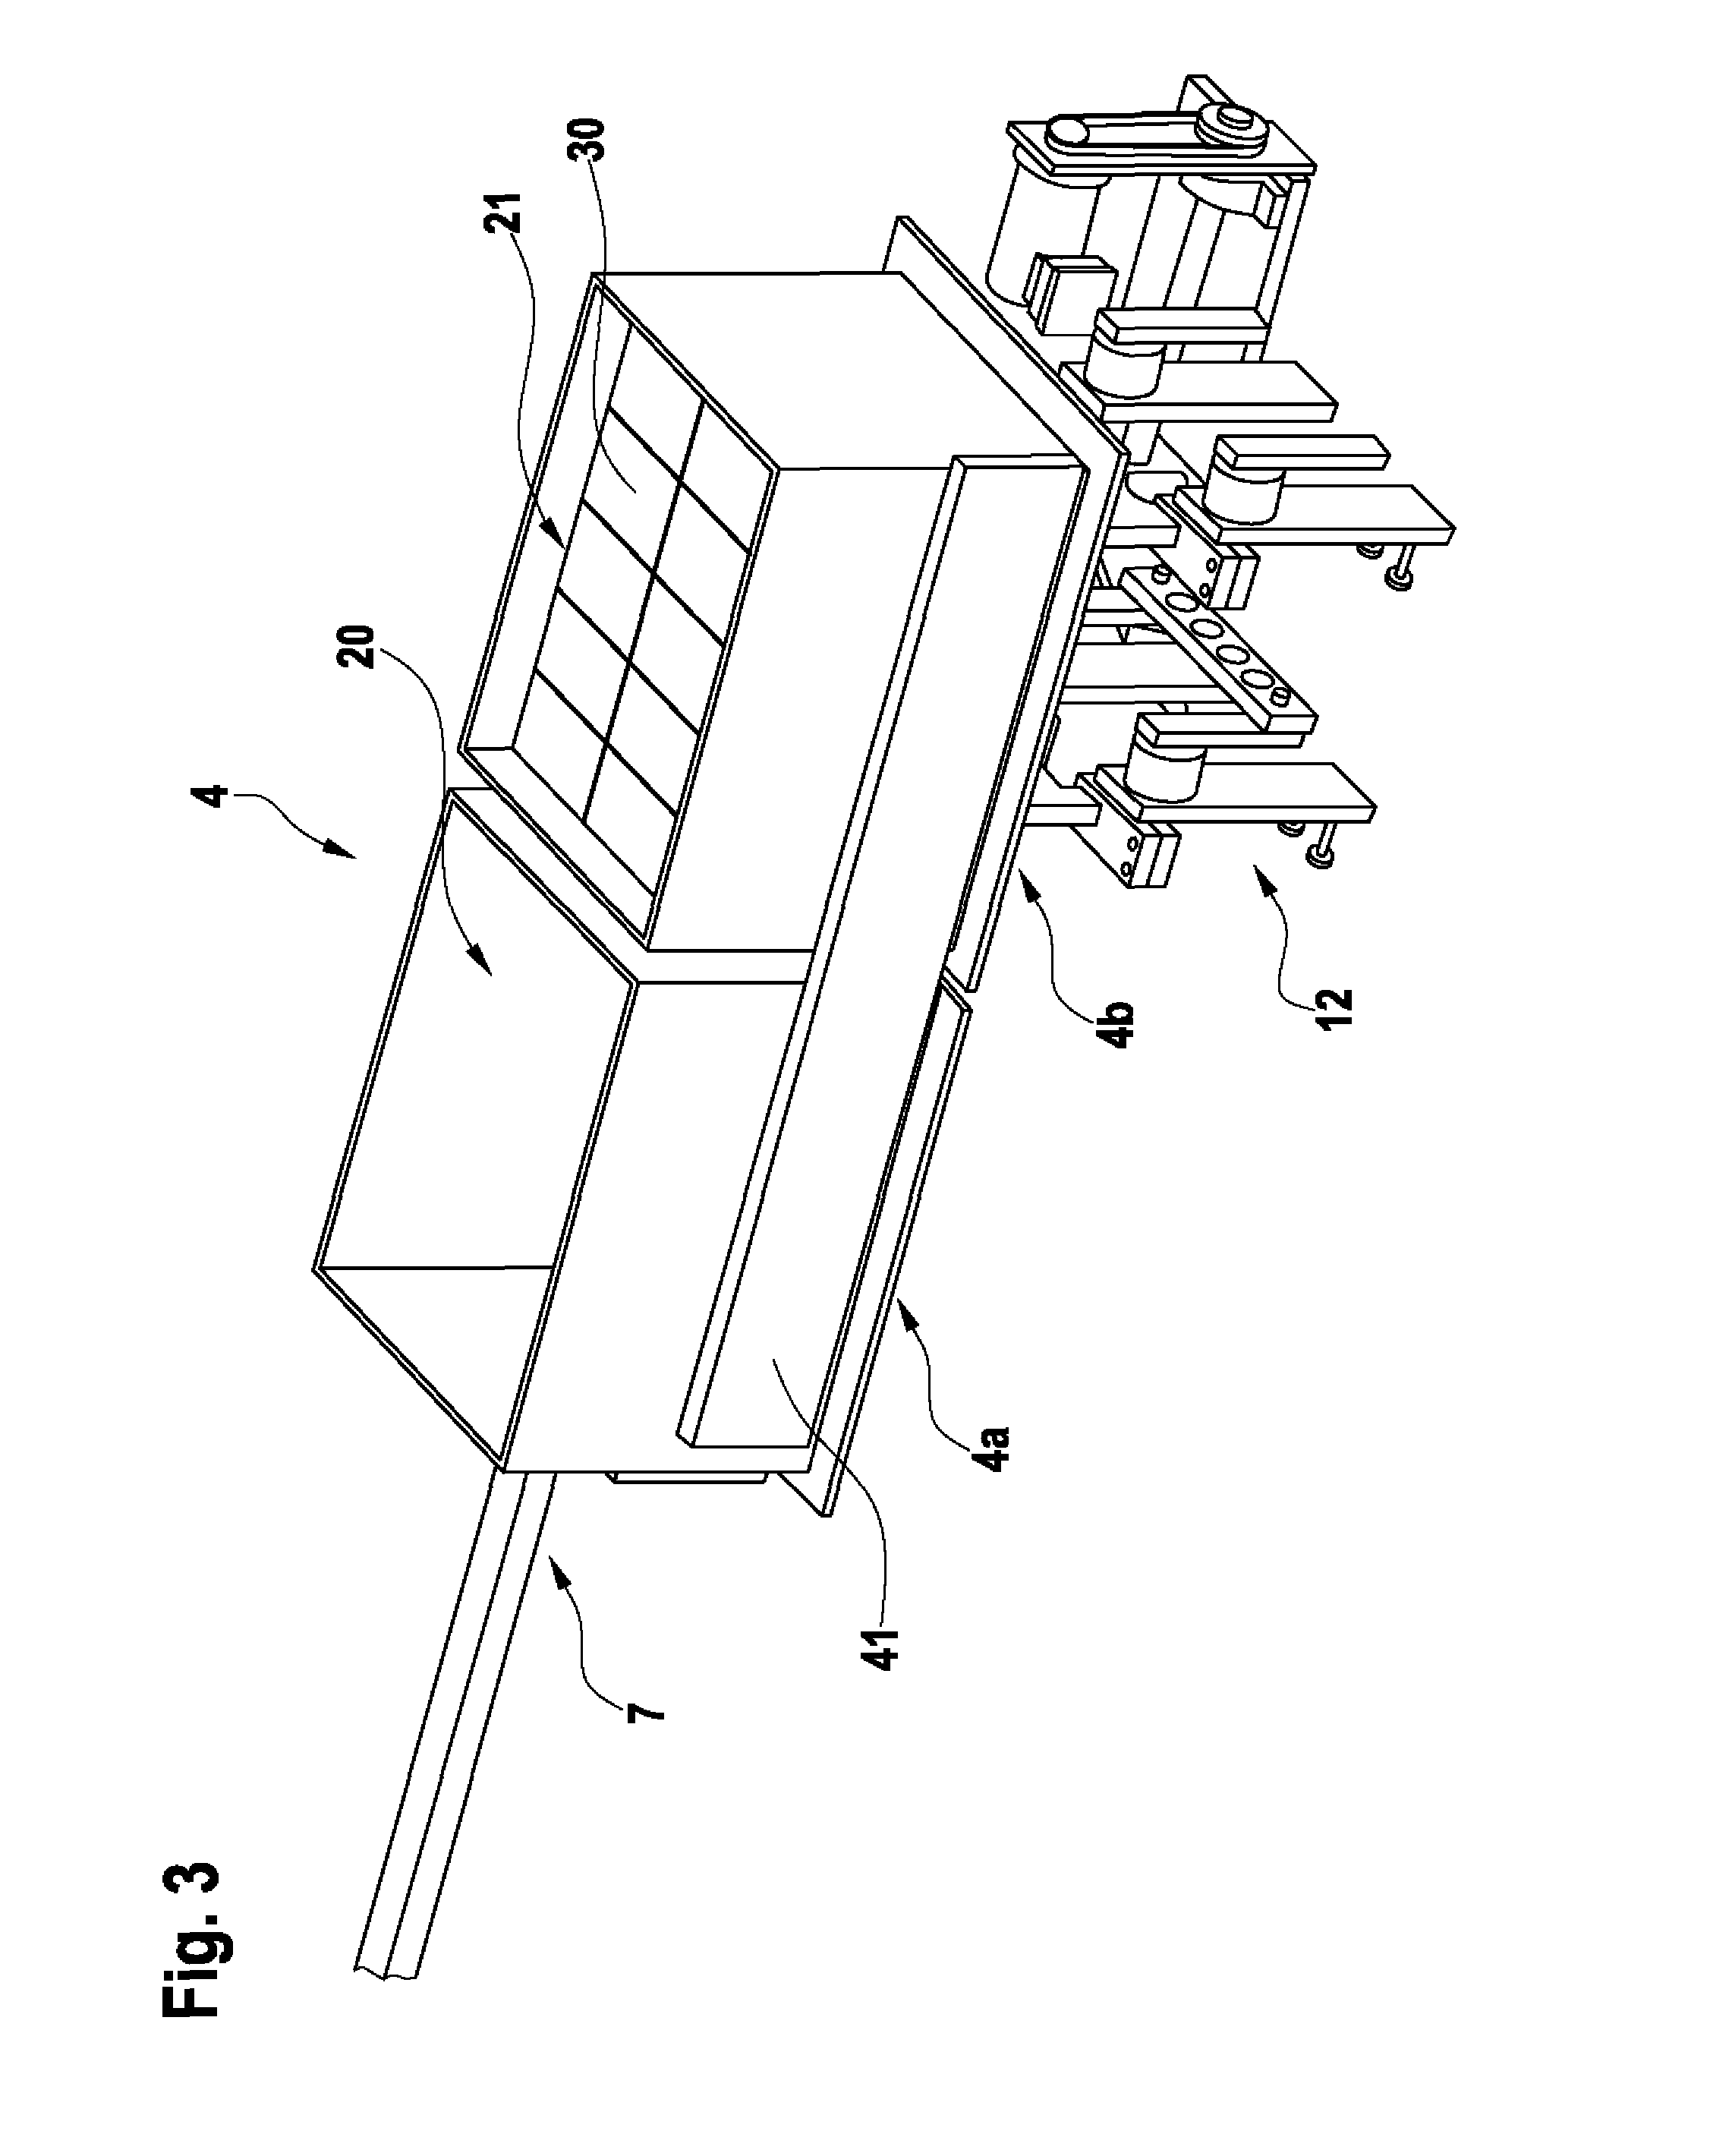 Packaging device